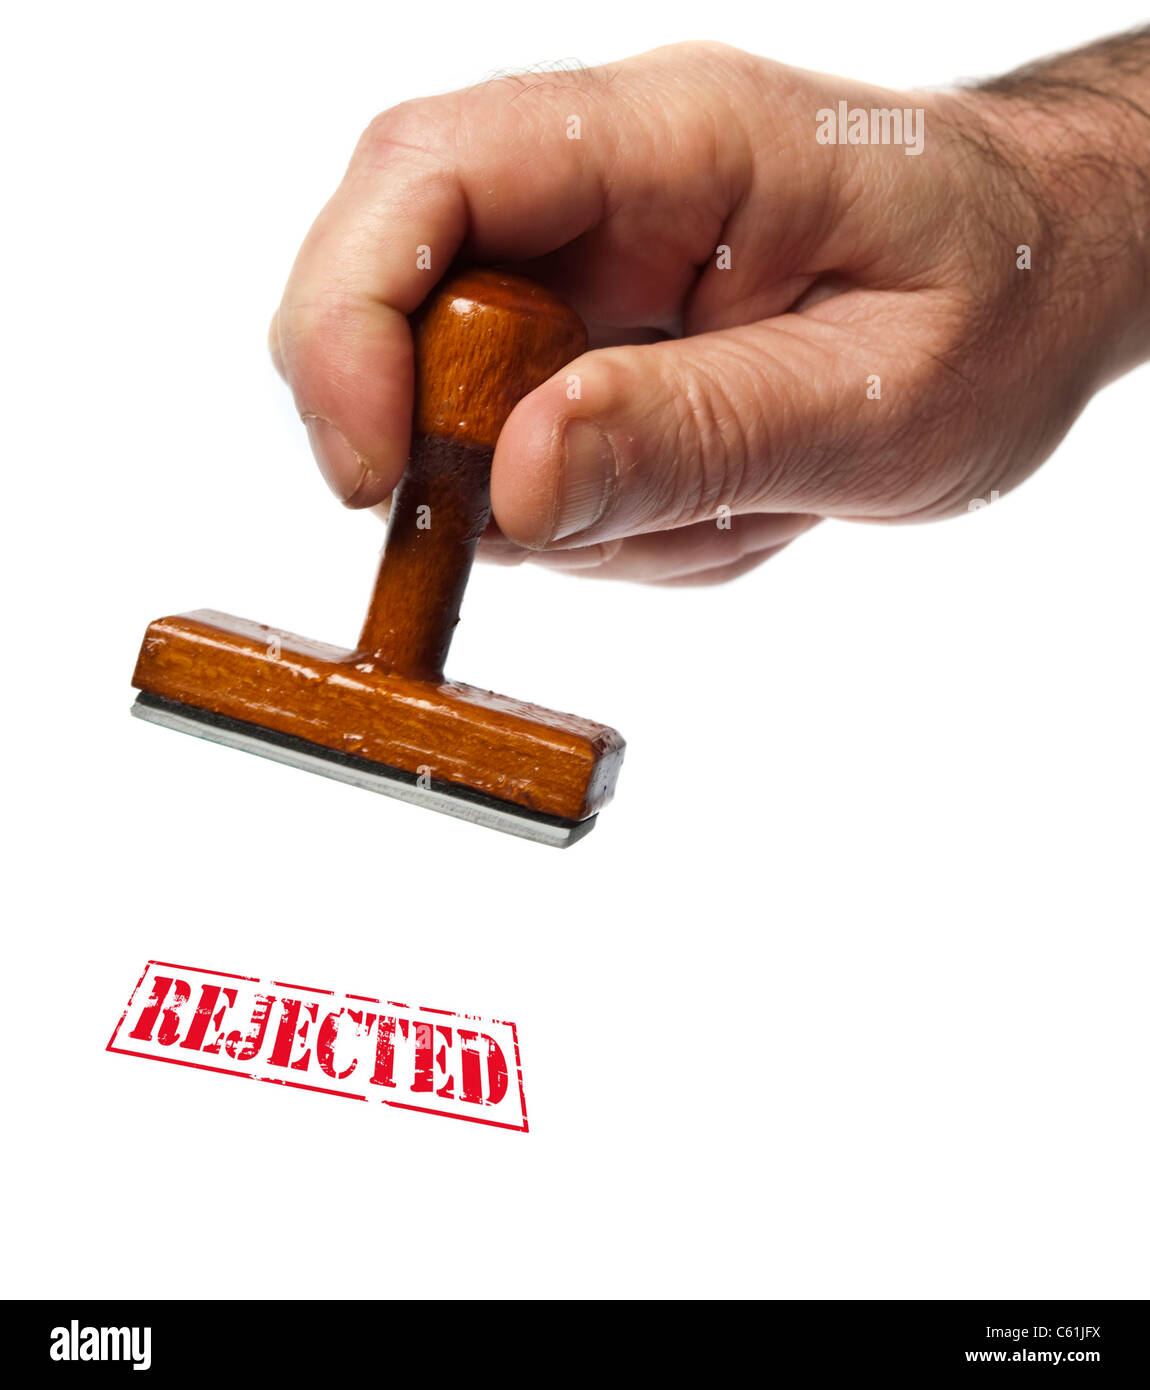 Rejected stamp in male hand Stock Photo